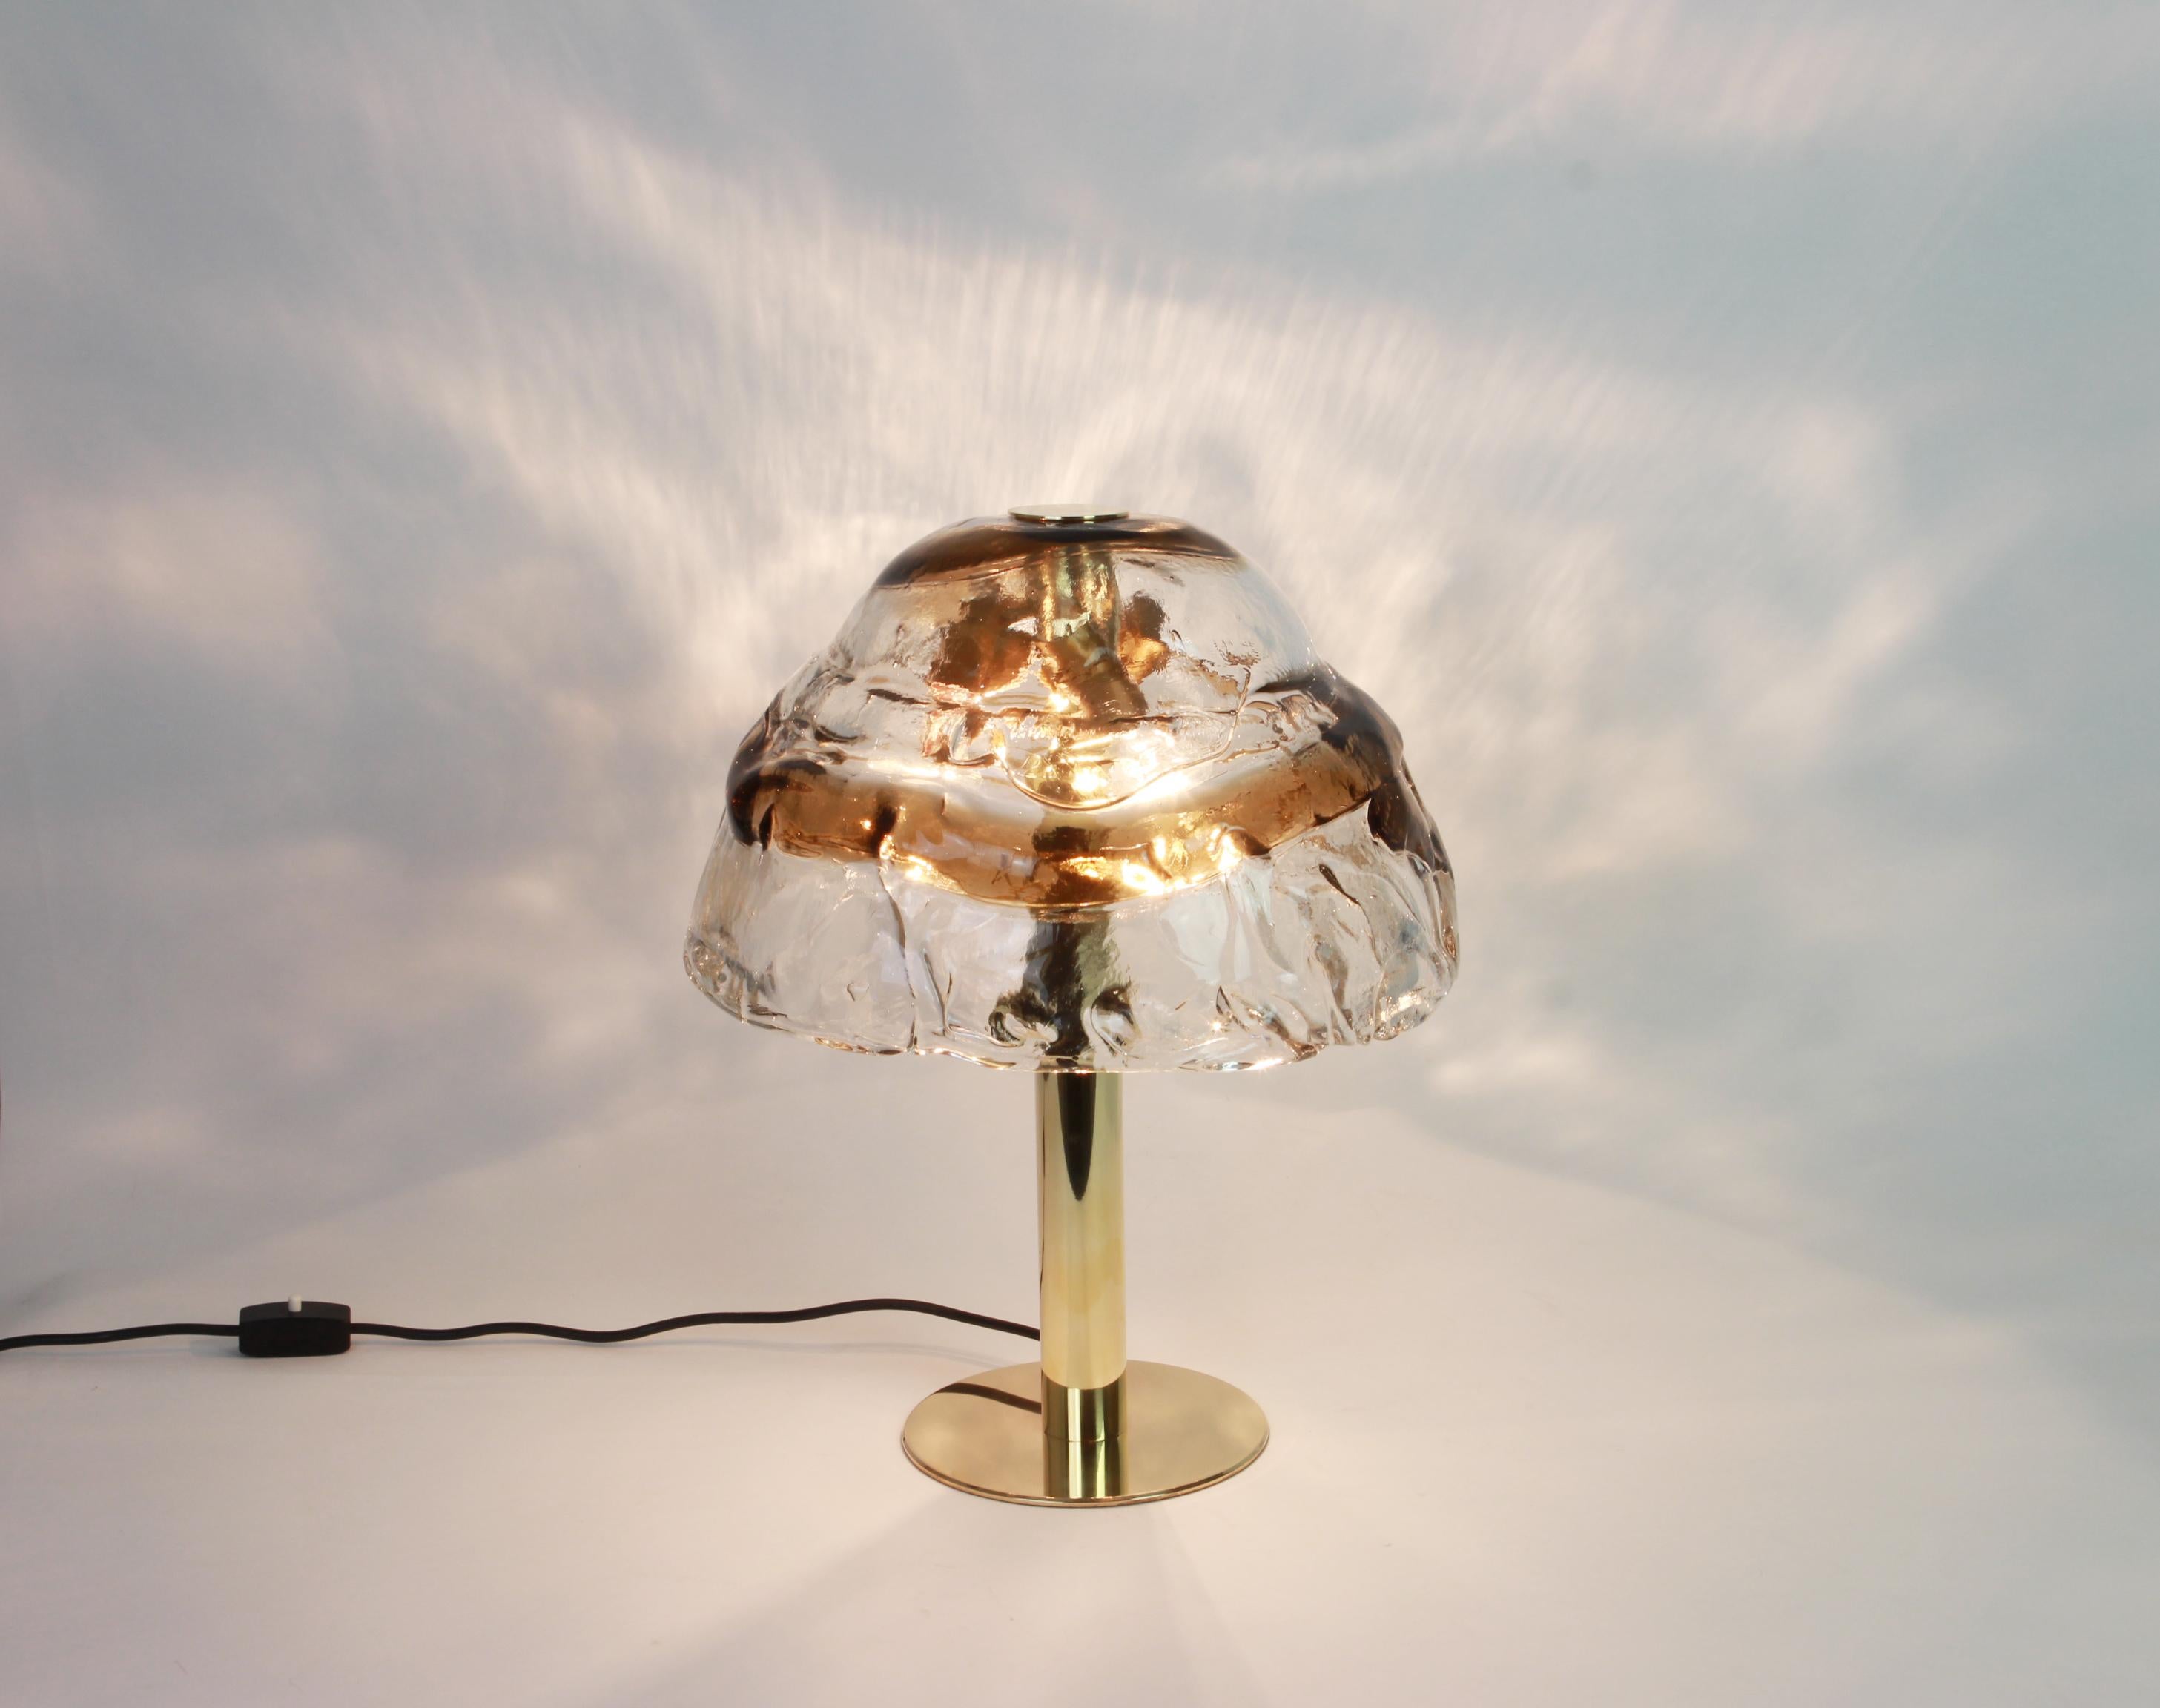 Stunning Murano glass table lamp by Kalmar, 1970s
Smoked swirl Murano glass, clear twisted crystal glass panels with a light goldish amber-colored stripe in it.

It needs 3 x E27 standard bulbs. (Max 50 watts each)
Light bulbs are not included.